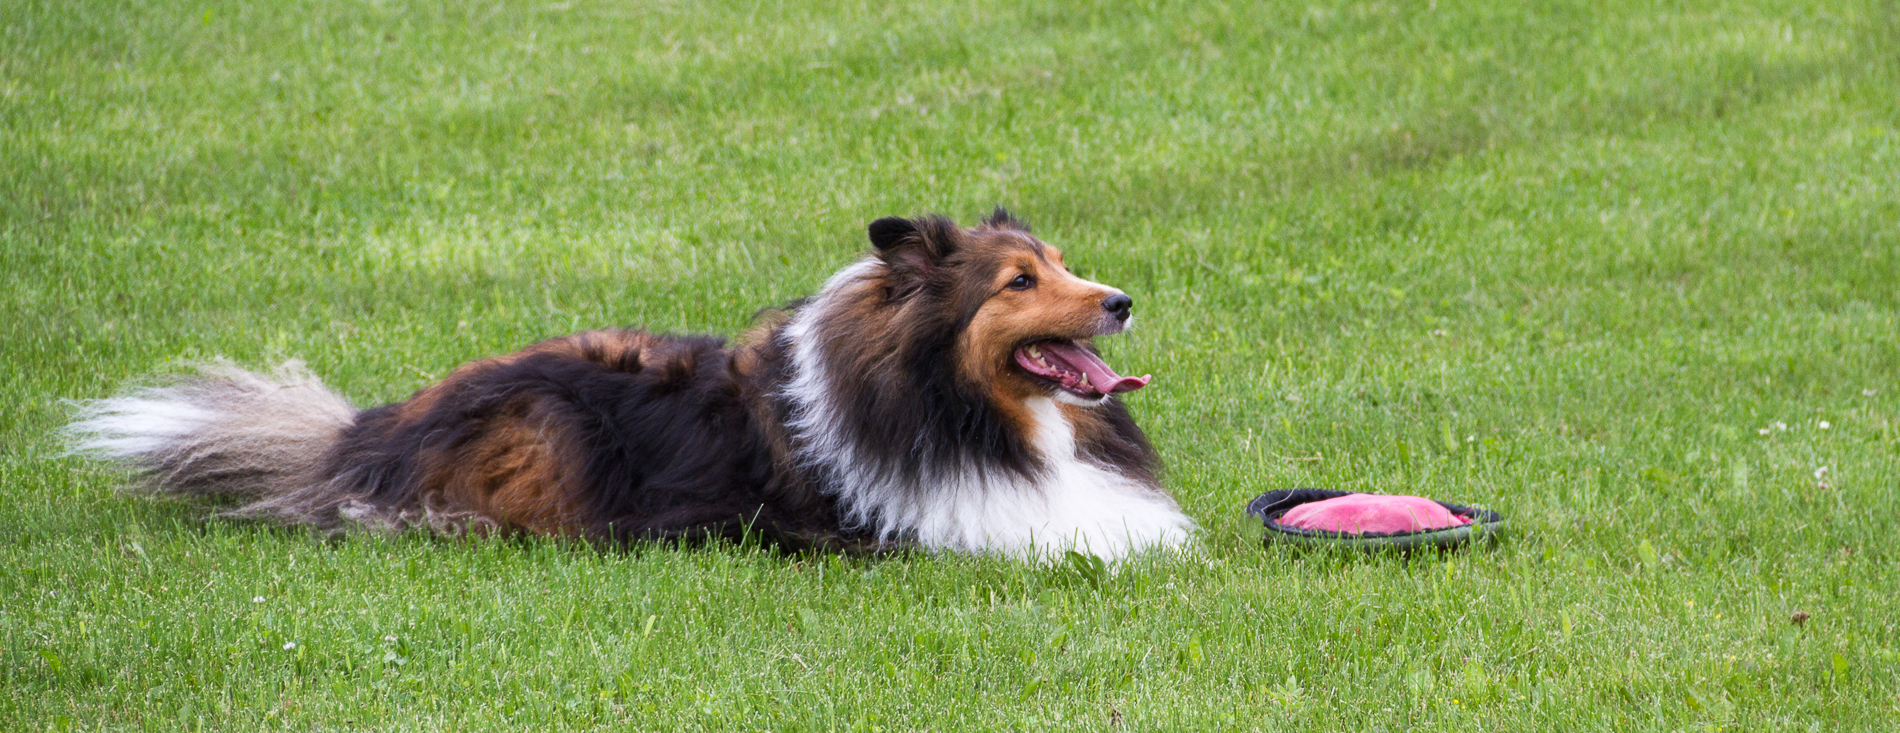 A panting collie, lying in the grass next to a Frisbee.